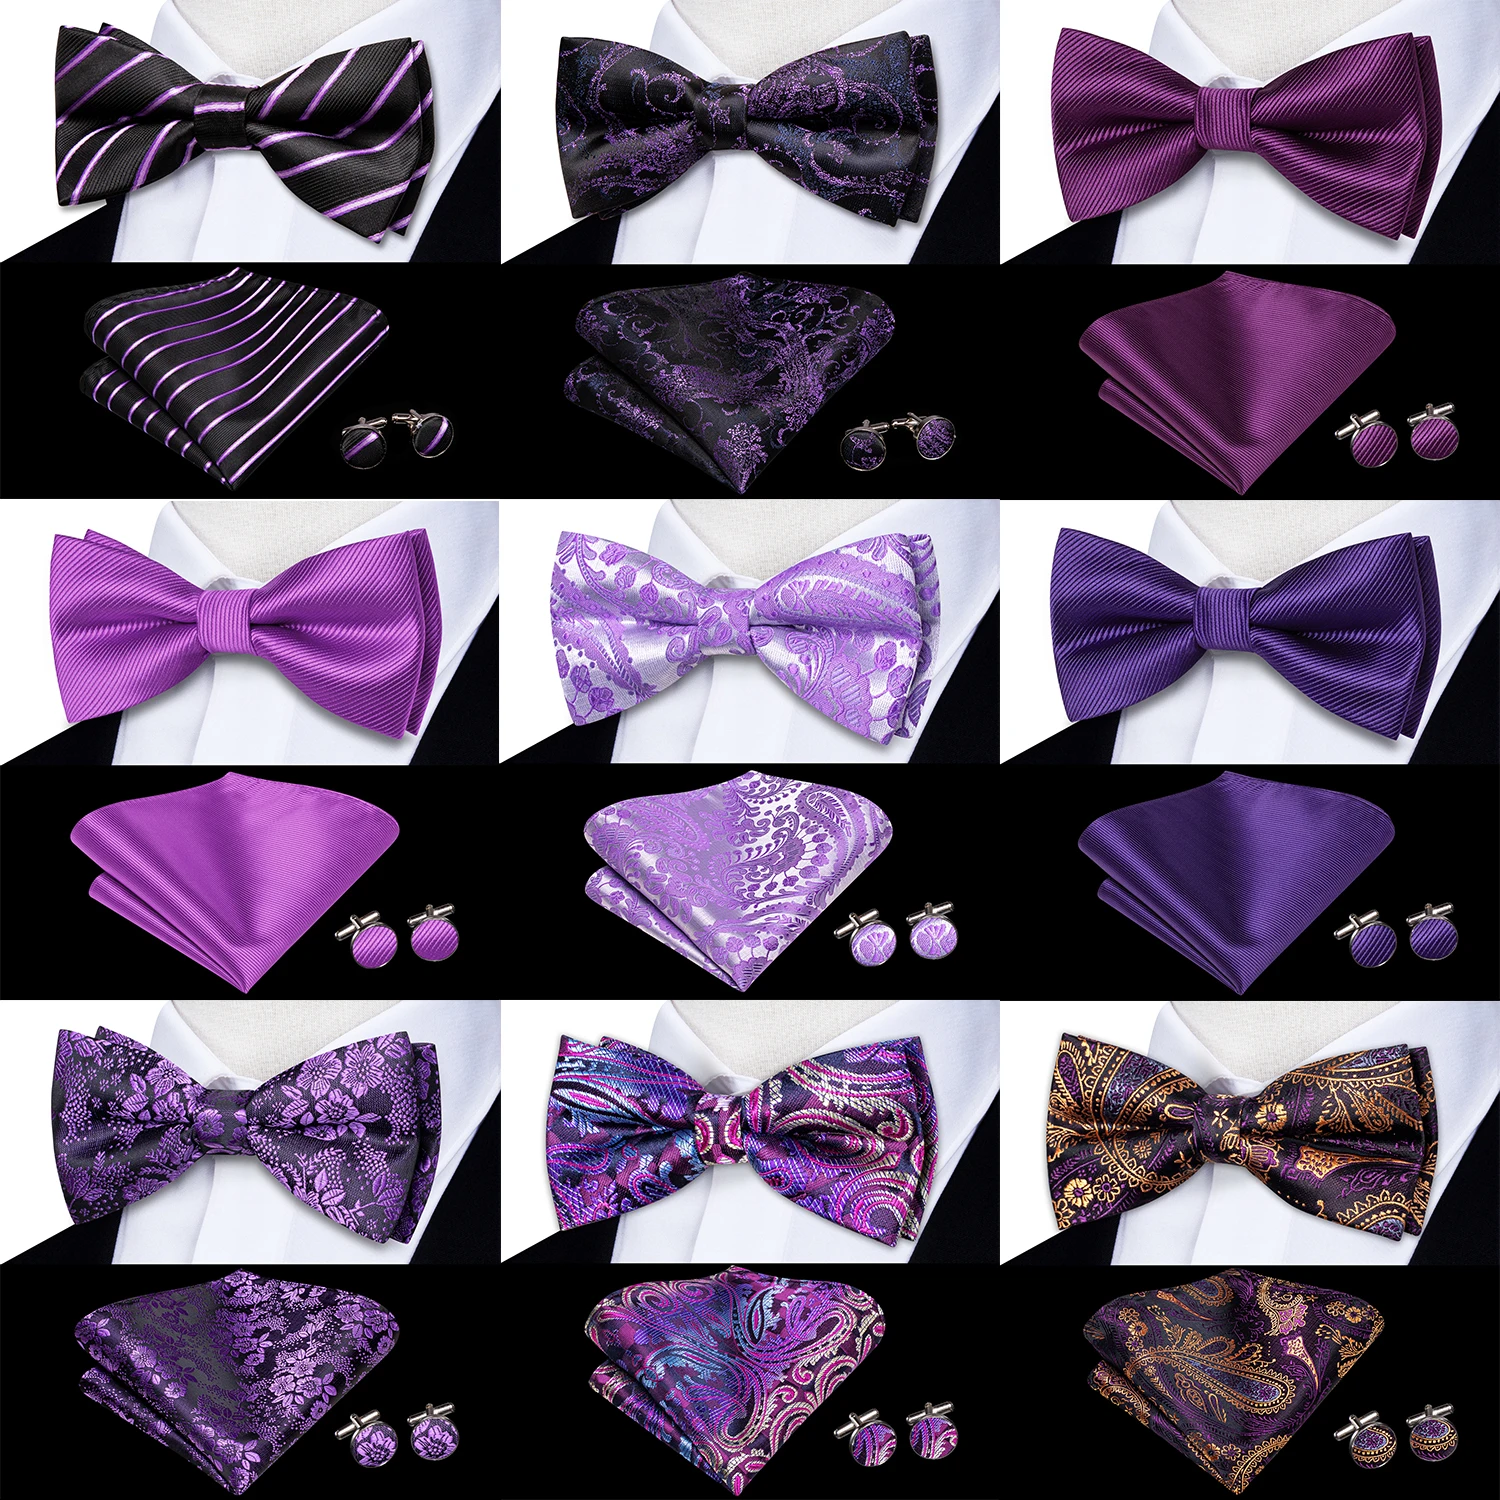 

Purple Lilac Lavender Pansy Violet Silk Mens Bow Tie Hanky Cuffs Set Pre-tied Butterfly Knot Bowtie for Male Wedding Business